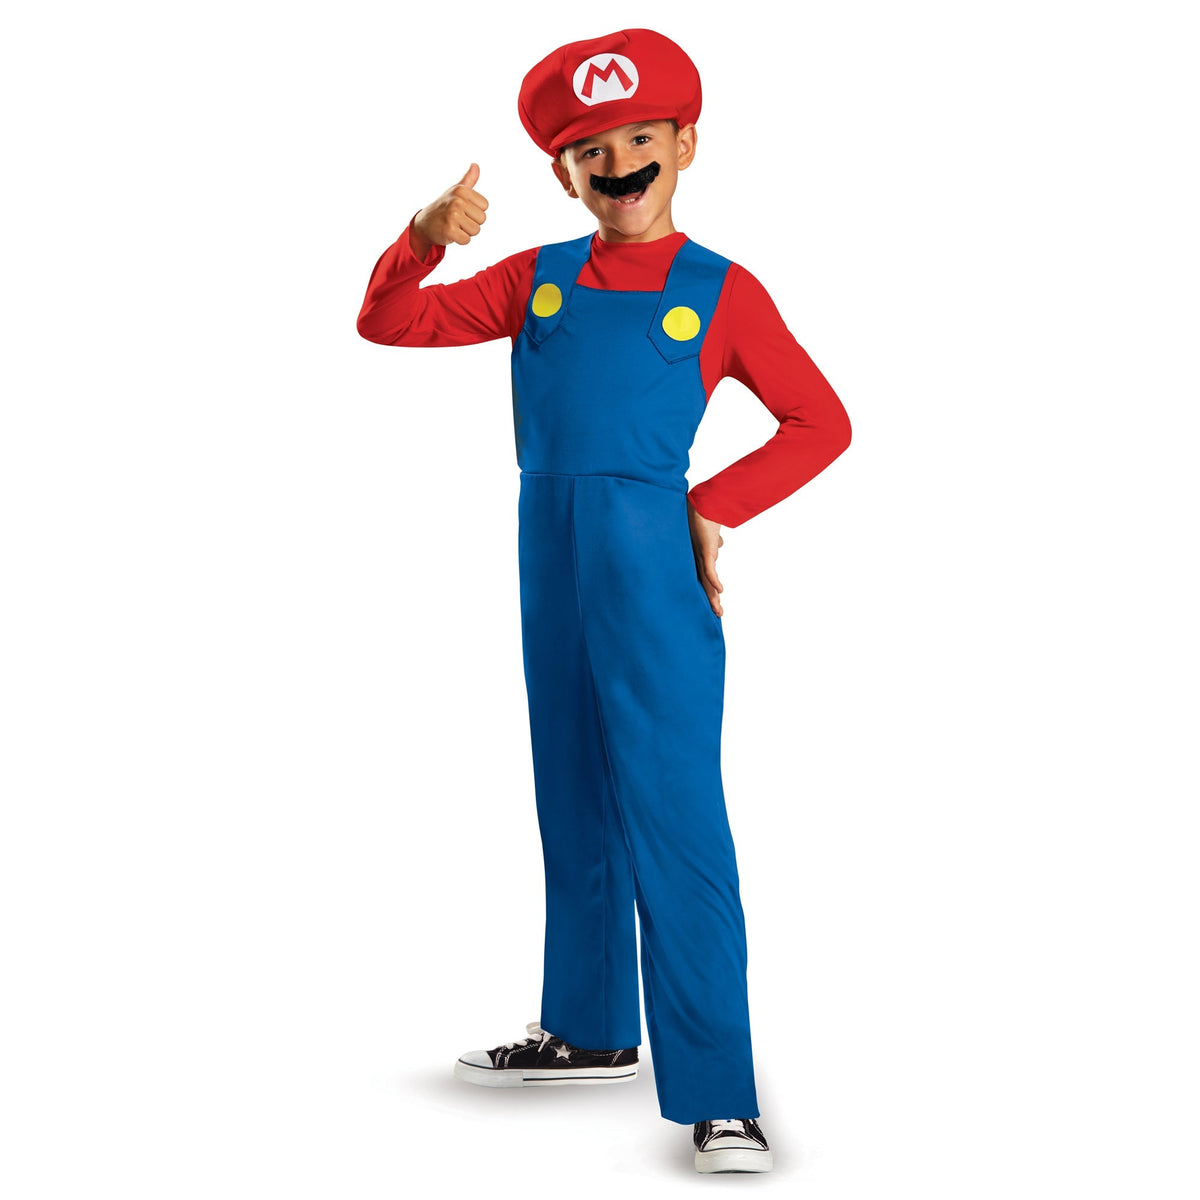 TOY-SPORT Costumes Super Mario Brothers Classic Mario Costume for Kids